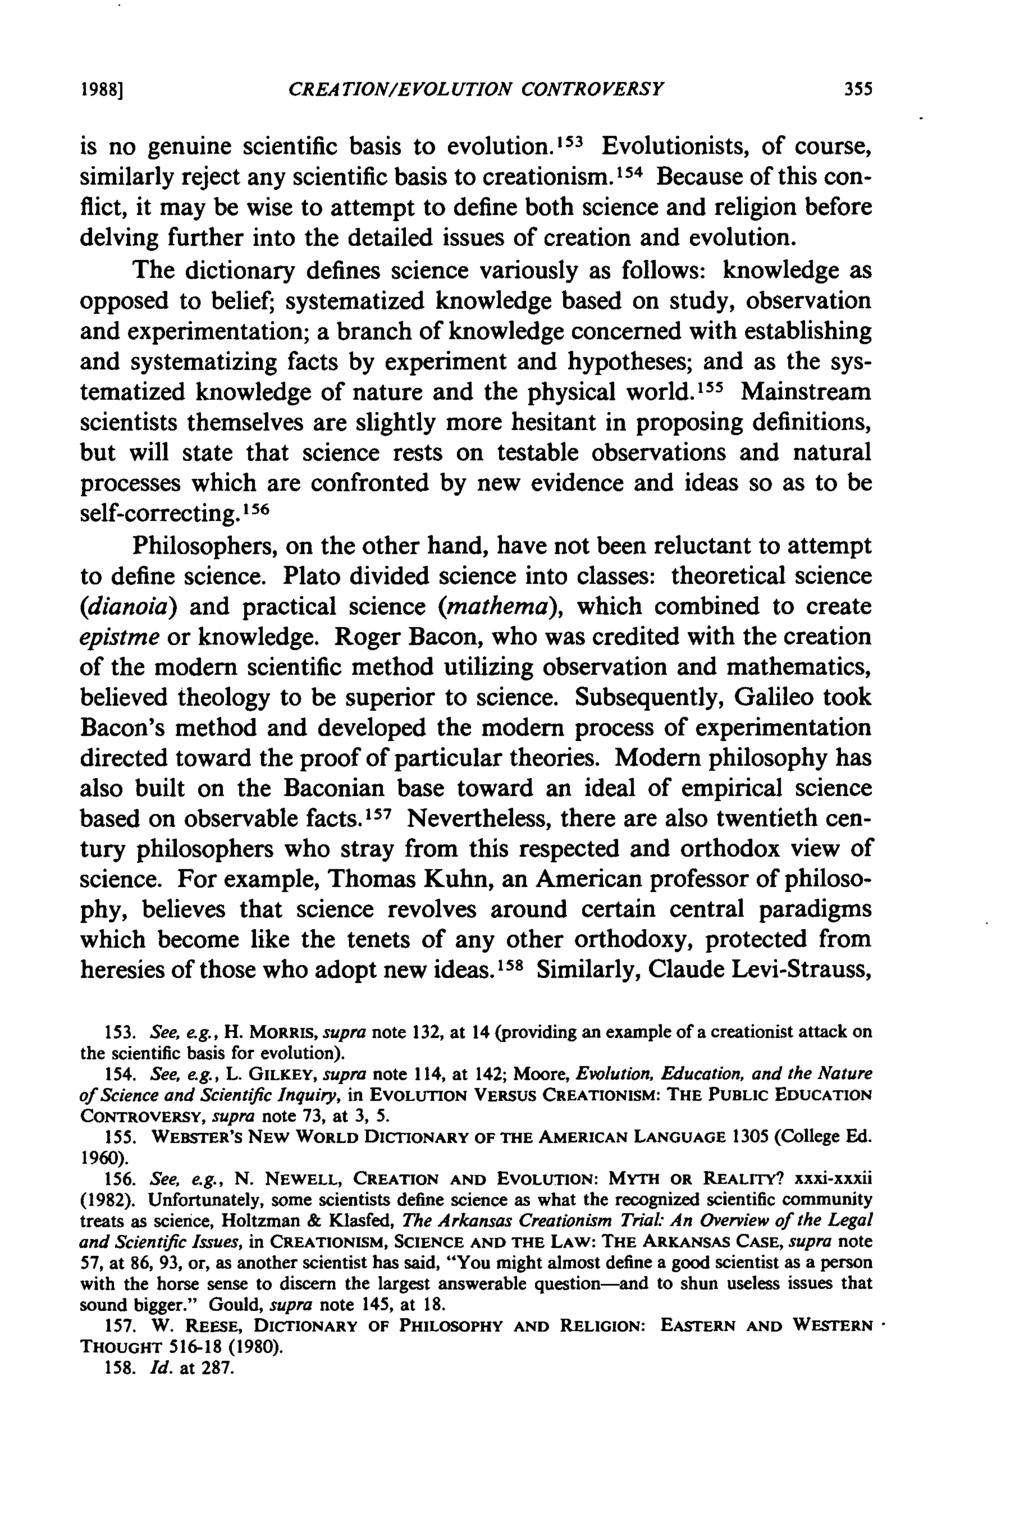 1988] CREA TIONIEVOLUTION CONTROVERSY is no genuine scientific basis to evolution. 153 Evolutionists, of course, similarly reject any scientific basis to creationism.